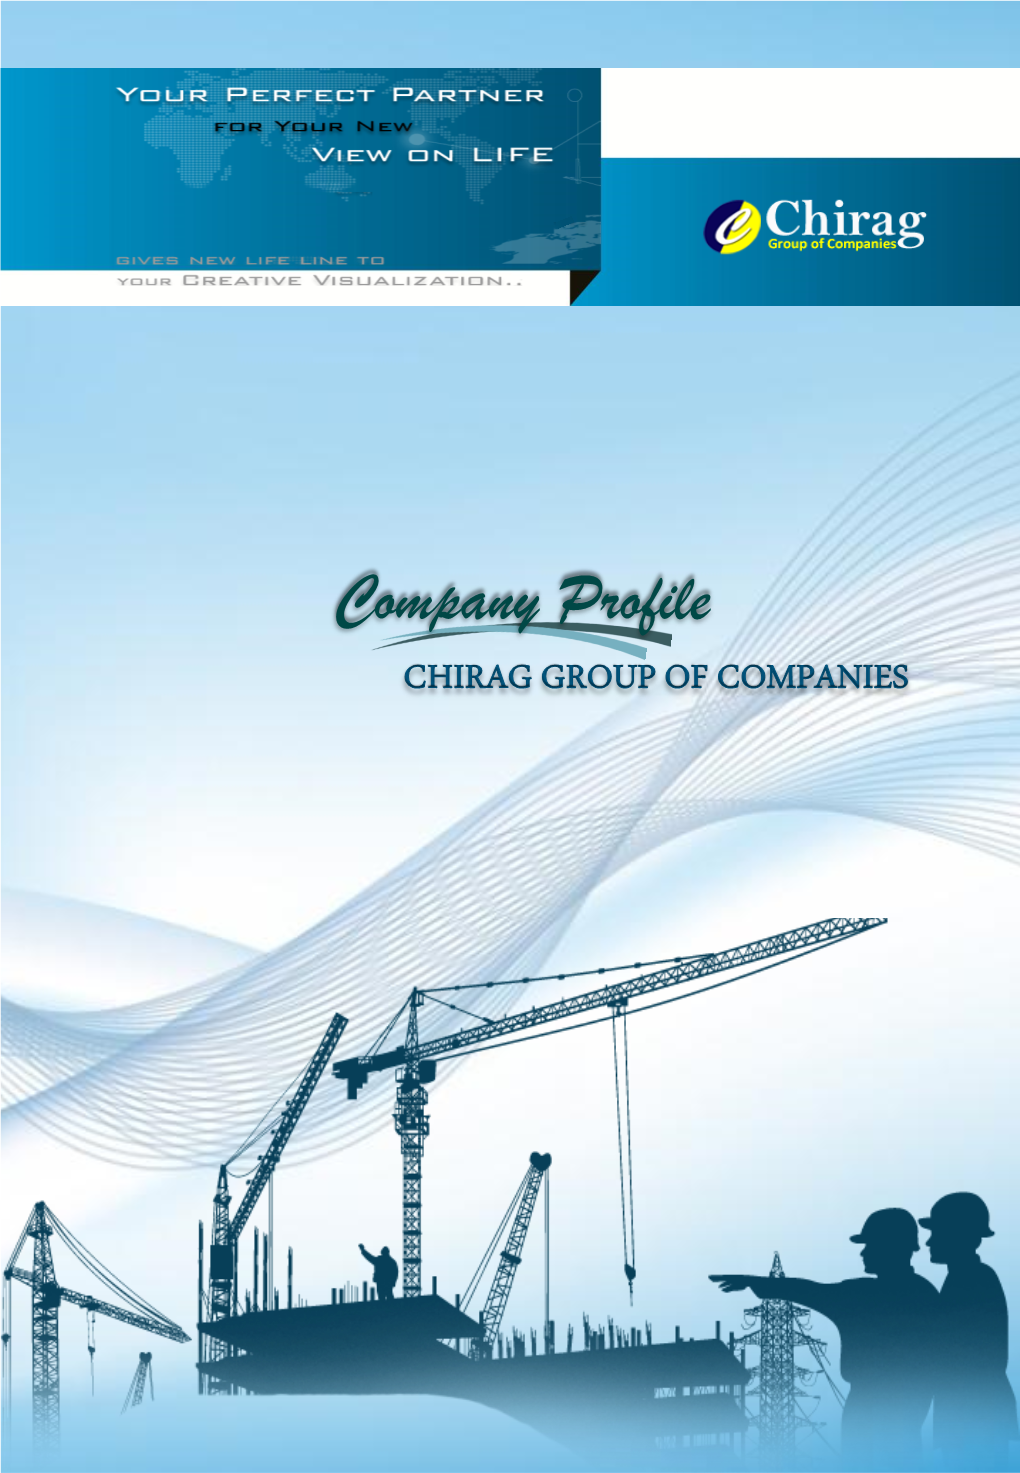 Company Profile CHIRAG GROUP of COMPANIES VISION